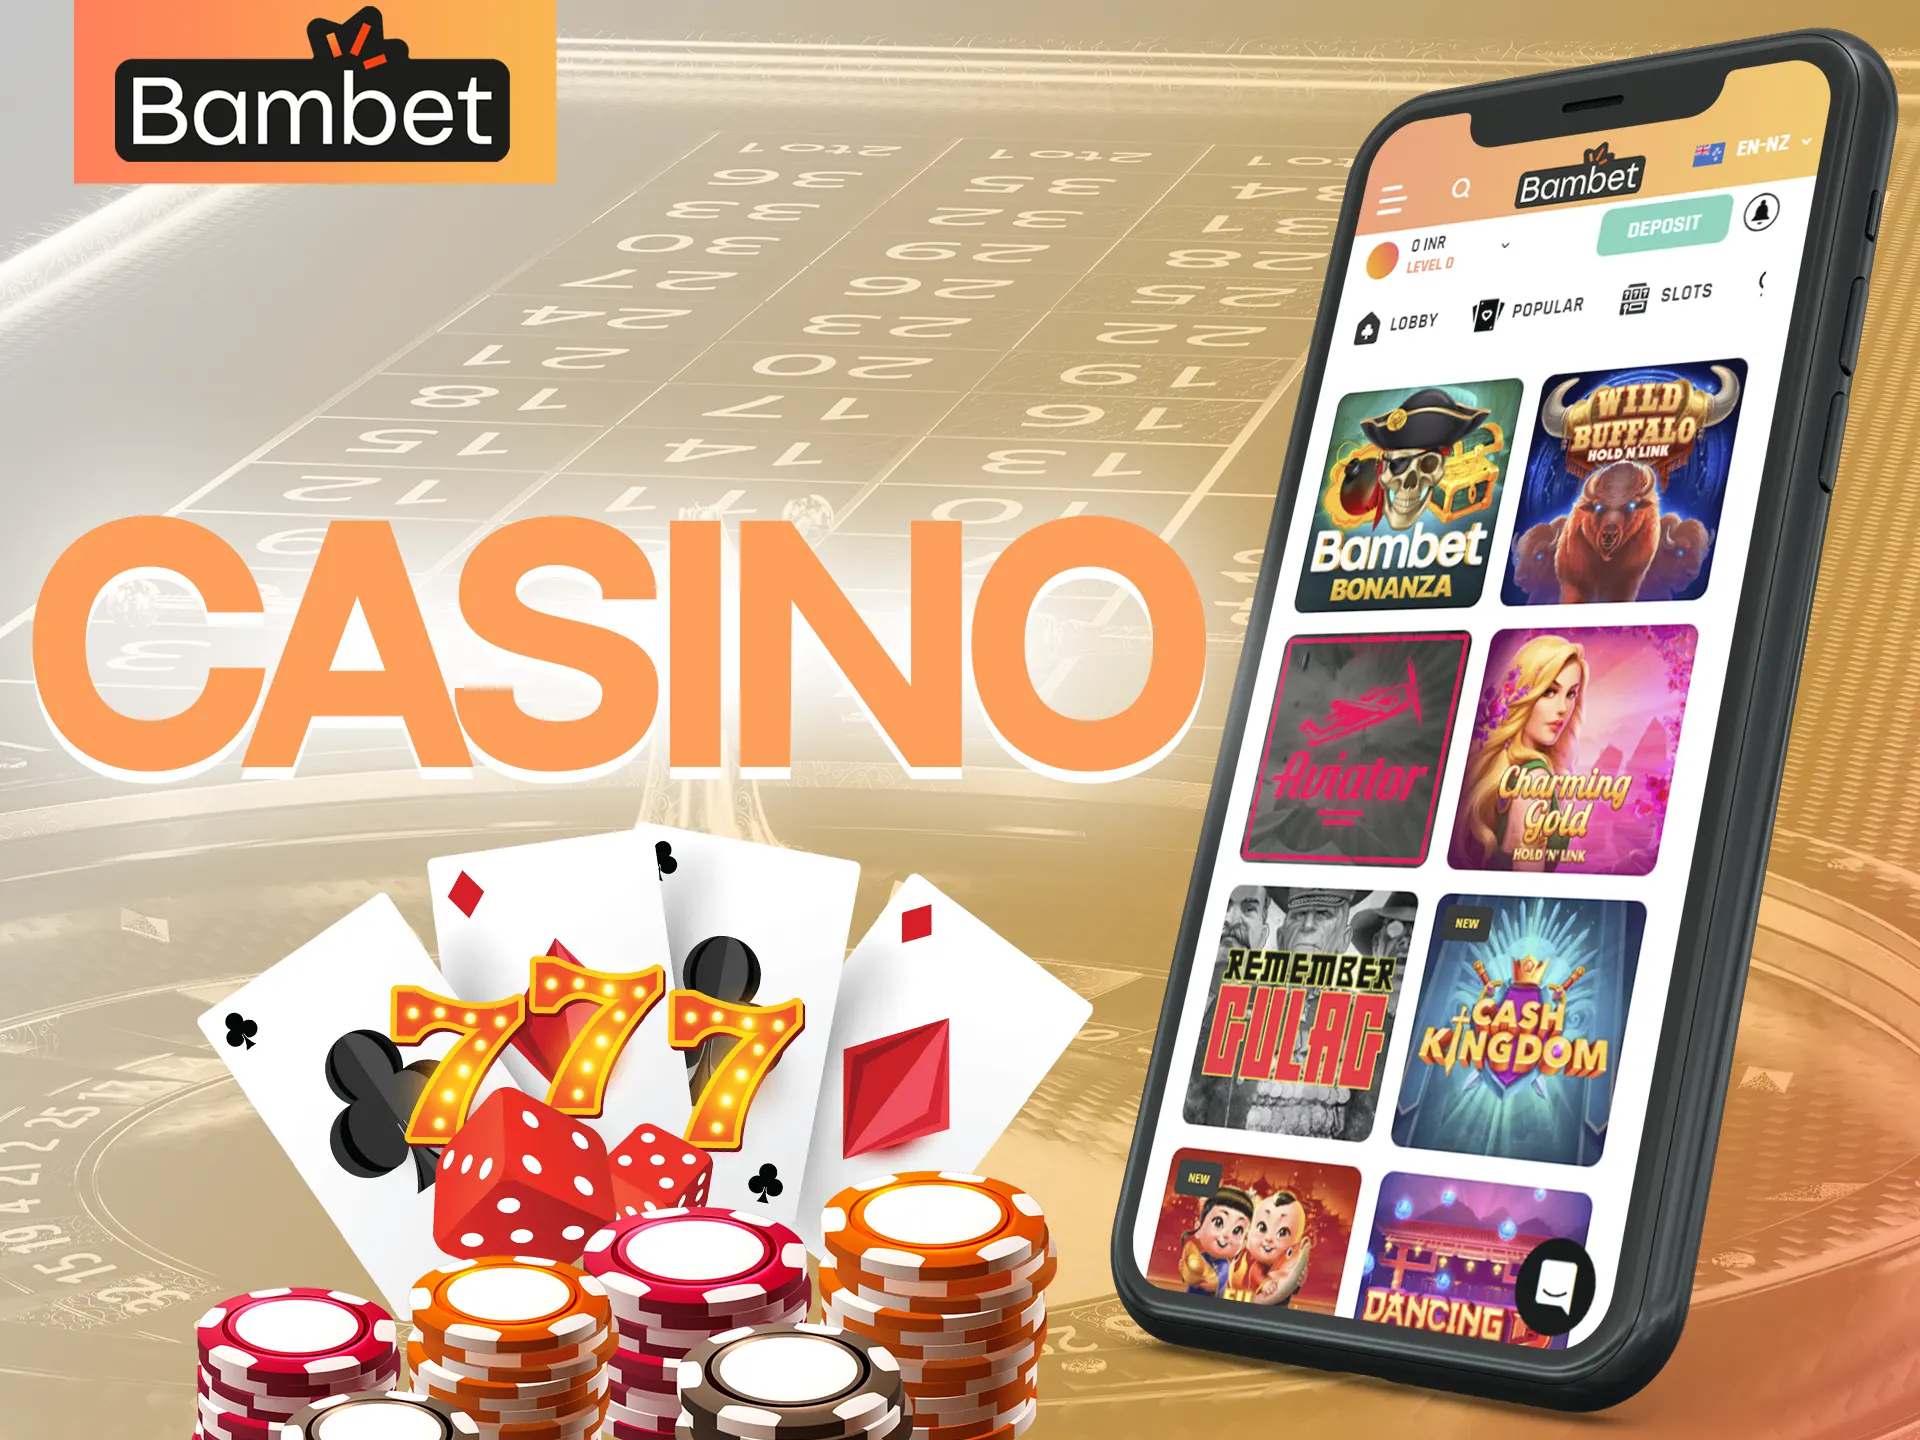 Be sure to visit the casino section of the Bambet app.